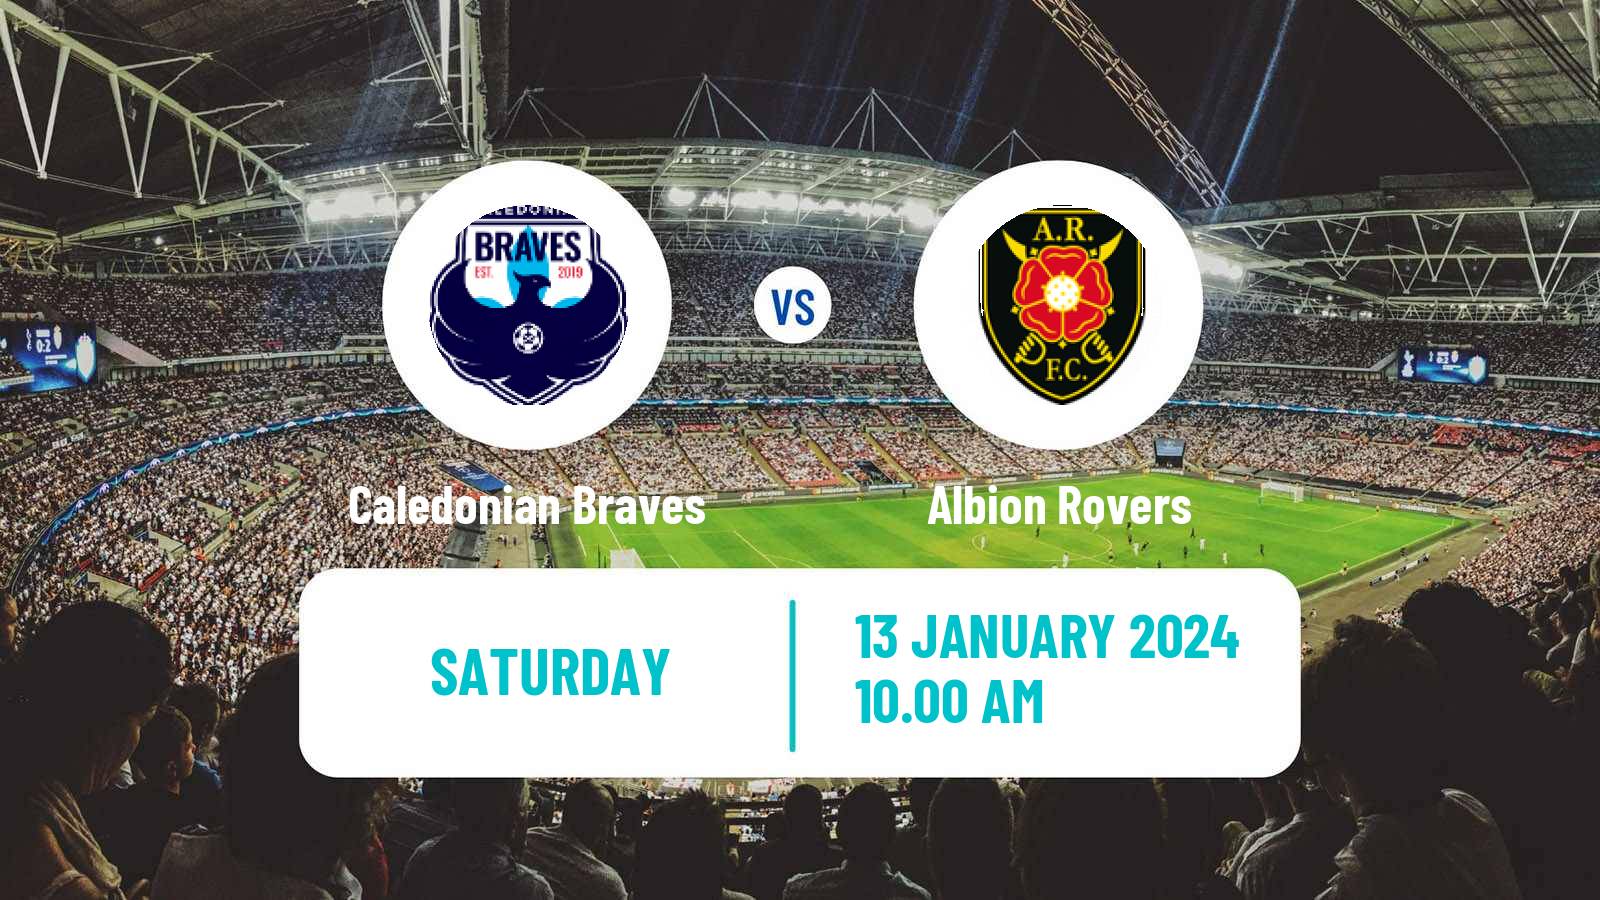 Soccer Scottish Lowland League Caledonian Braves - Albion Rovers